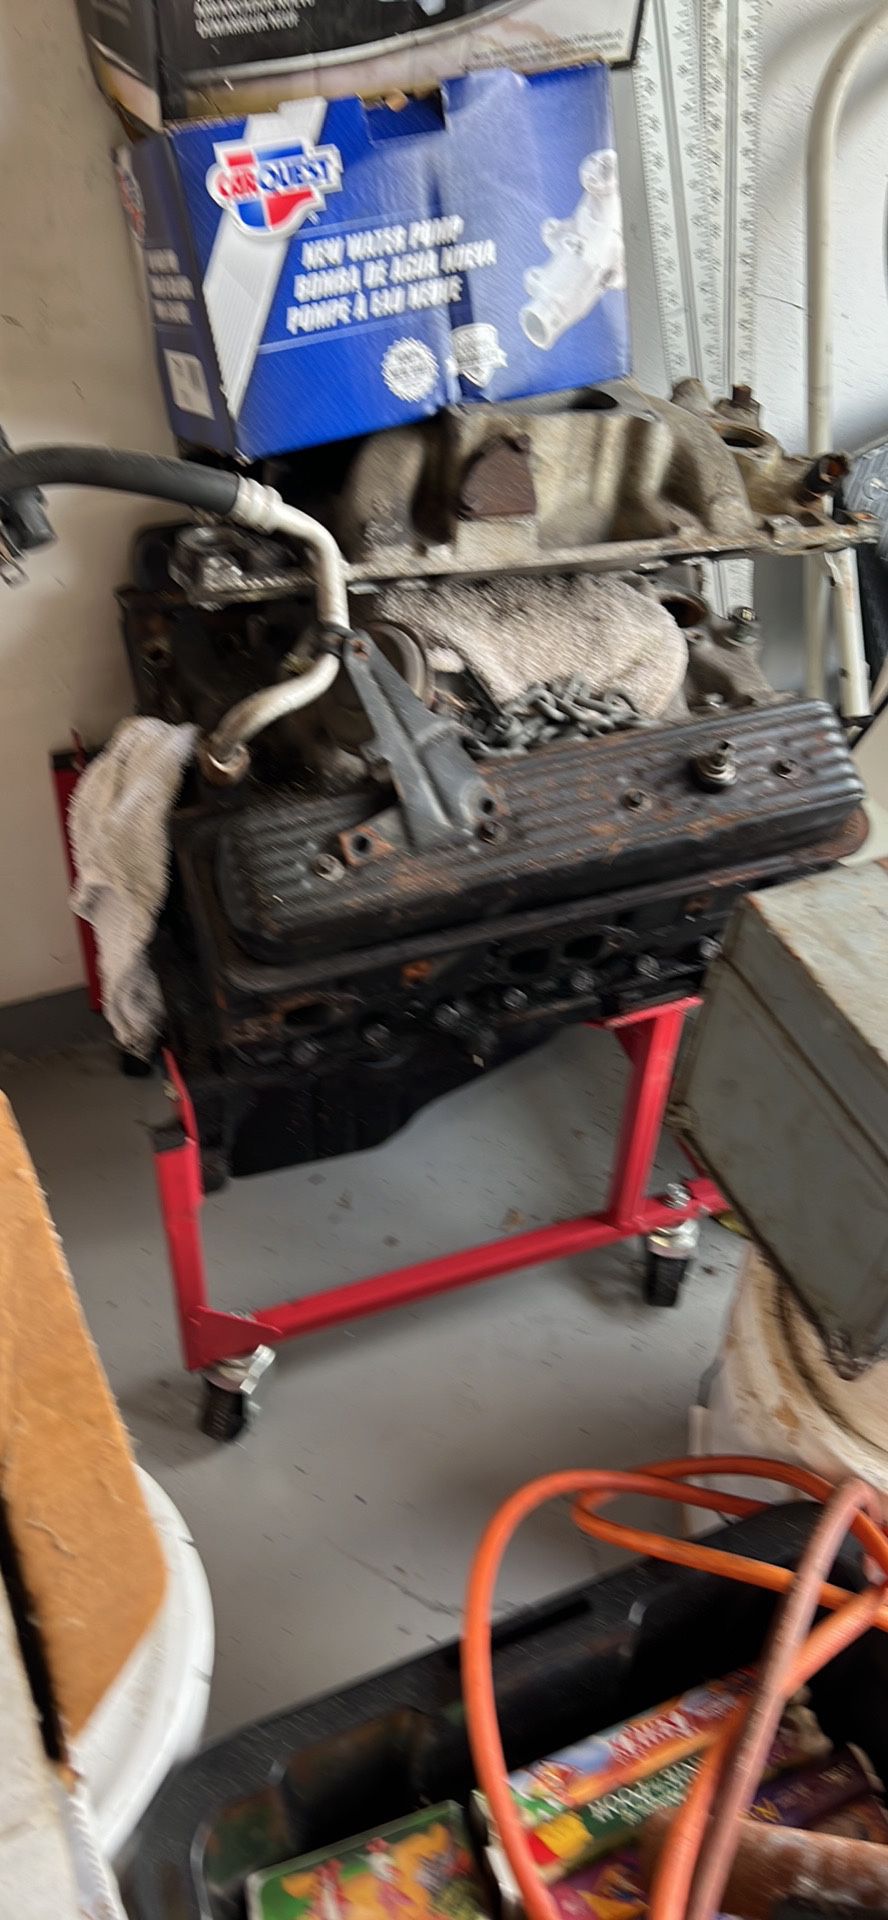 Chevy Engine And Parts